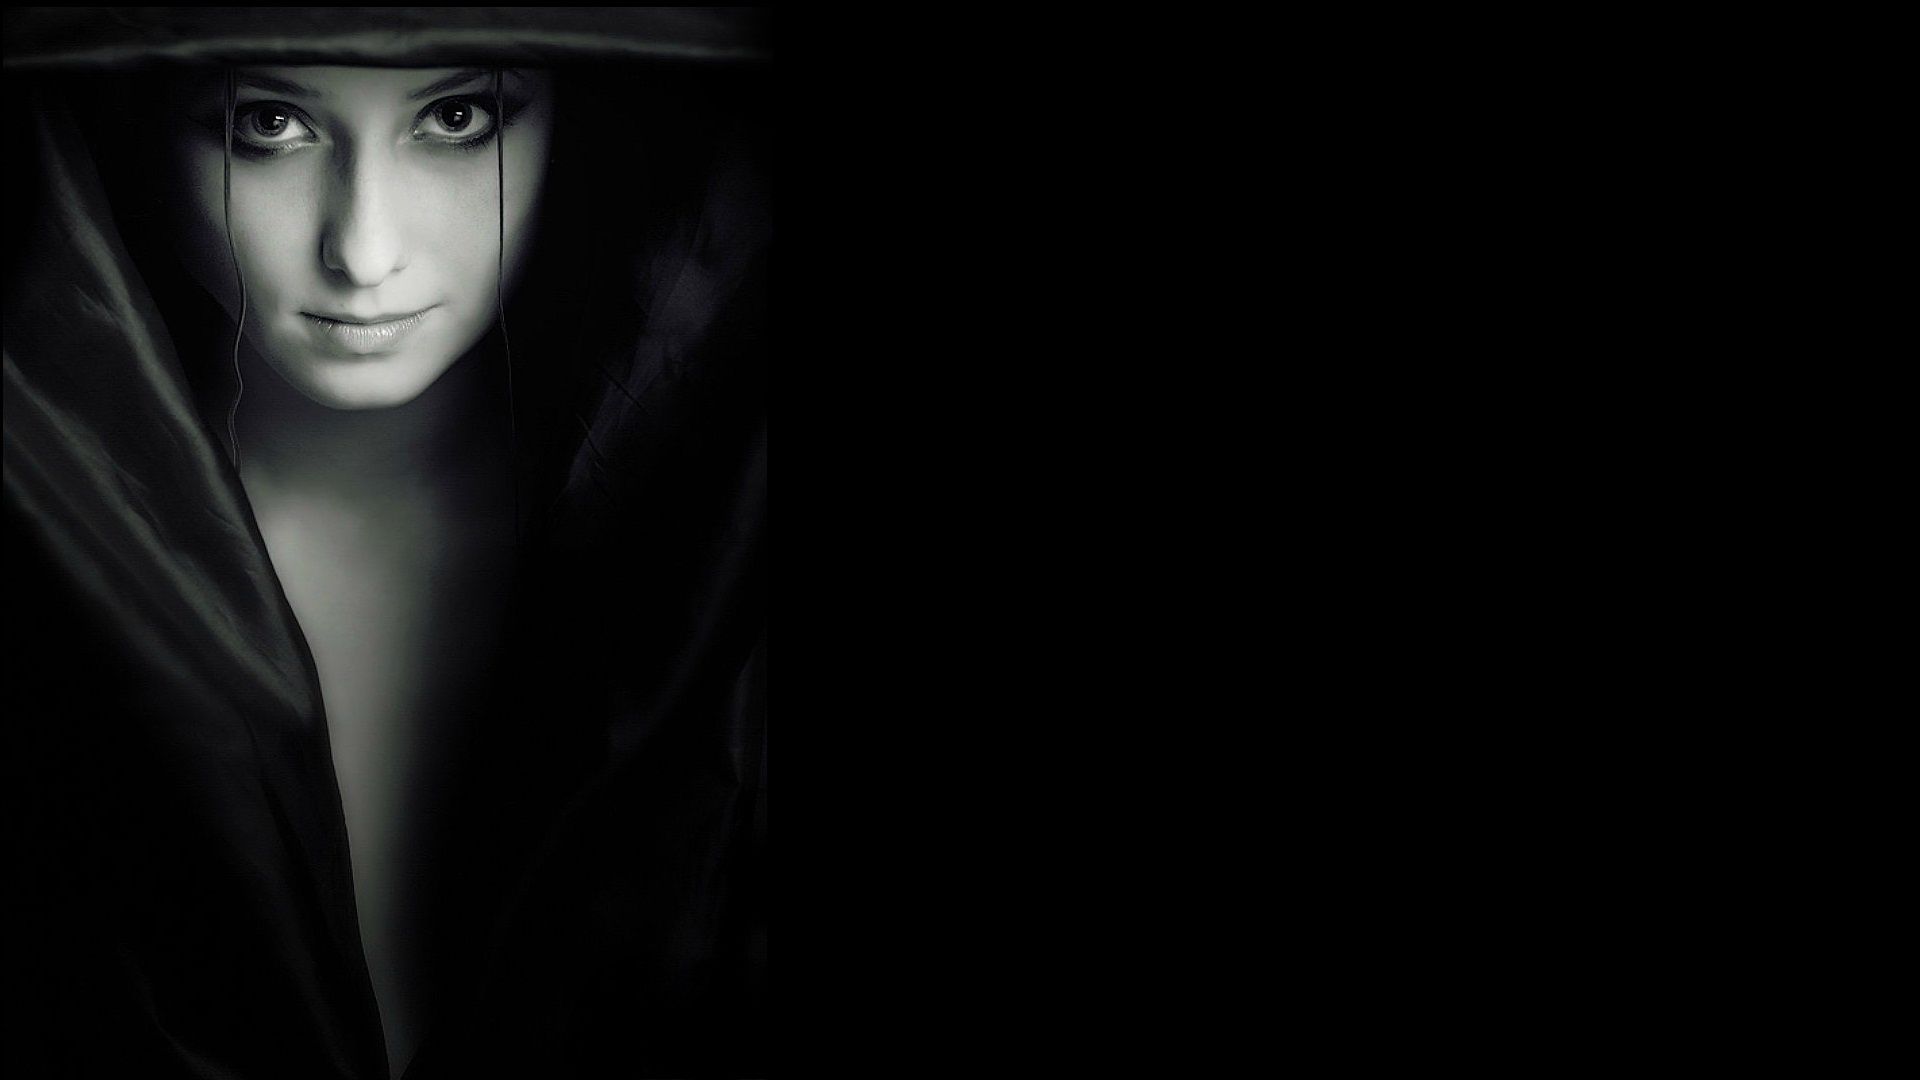 Free download close sub categories girls tags girl dark shadow vampire how to set [1920x1080] for your Desktop, Mobile & Tablet. Explore Black and White Girl Wallpaper